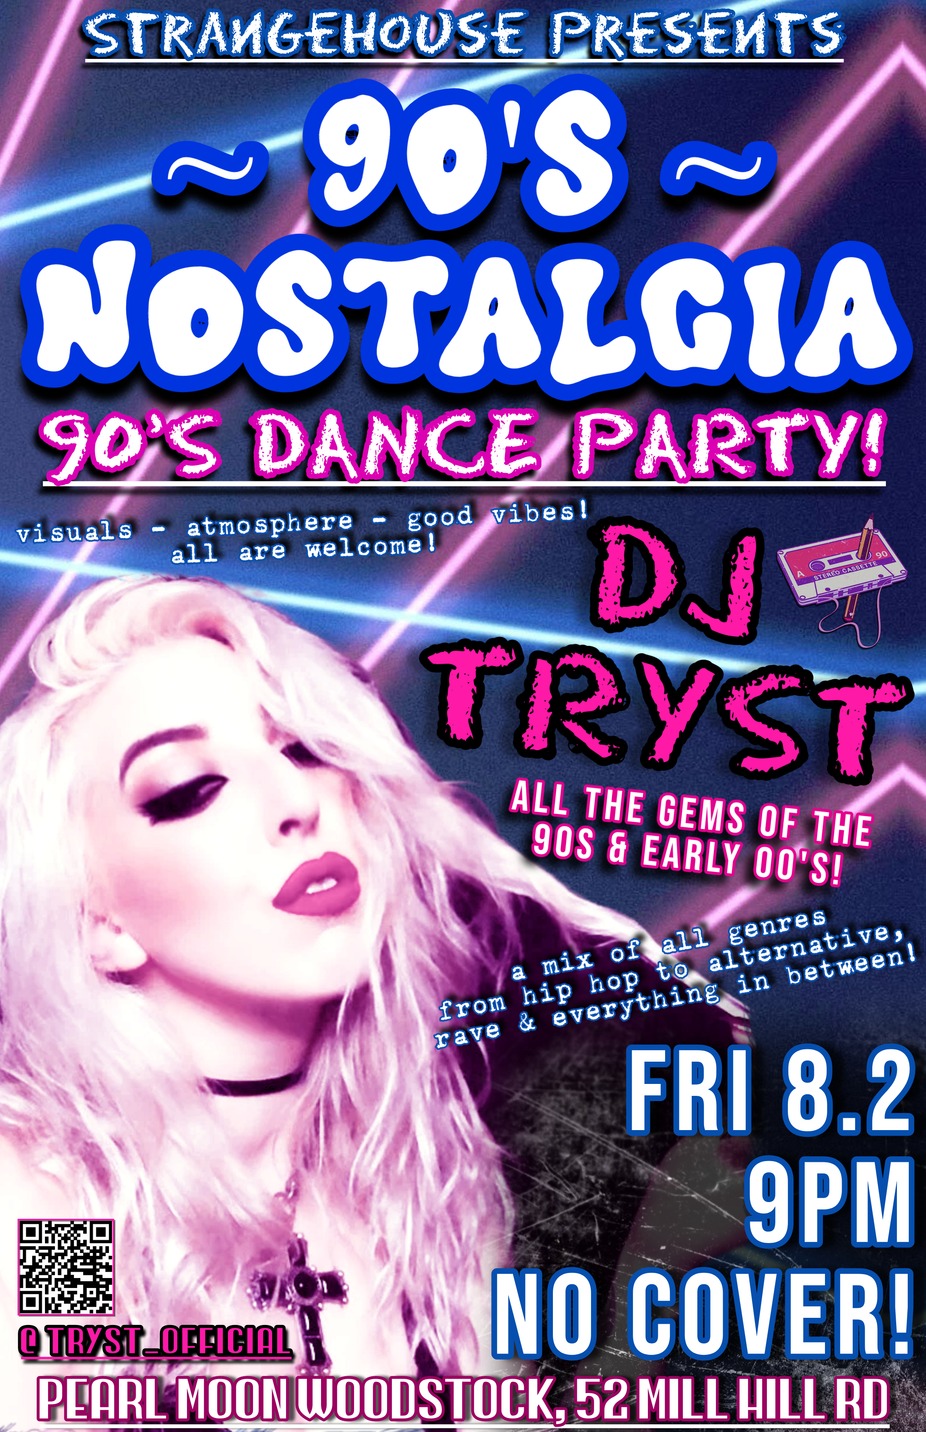 90's DANCE PARTY with DJ TRYST at PEARL MOON WOODSTOCK event photo